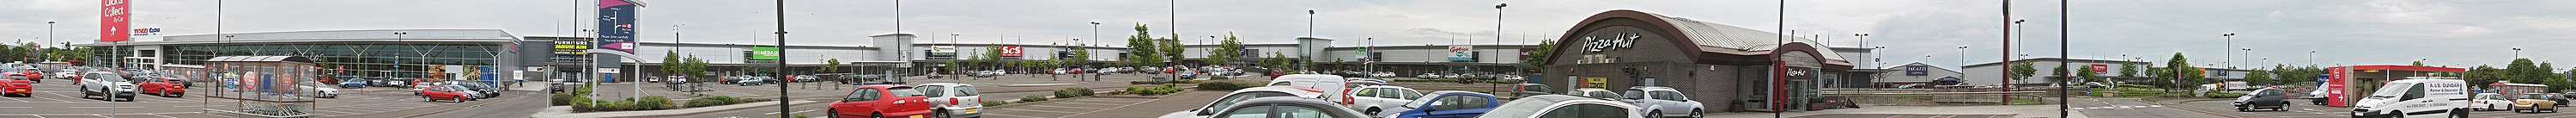 Kingsway West Retail Park in Dundee, Scotland, via a wide image that shows parking areas and customer vehicles